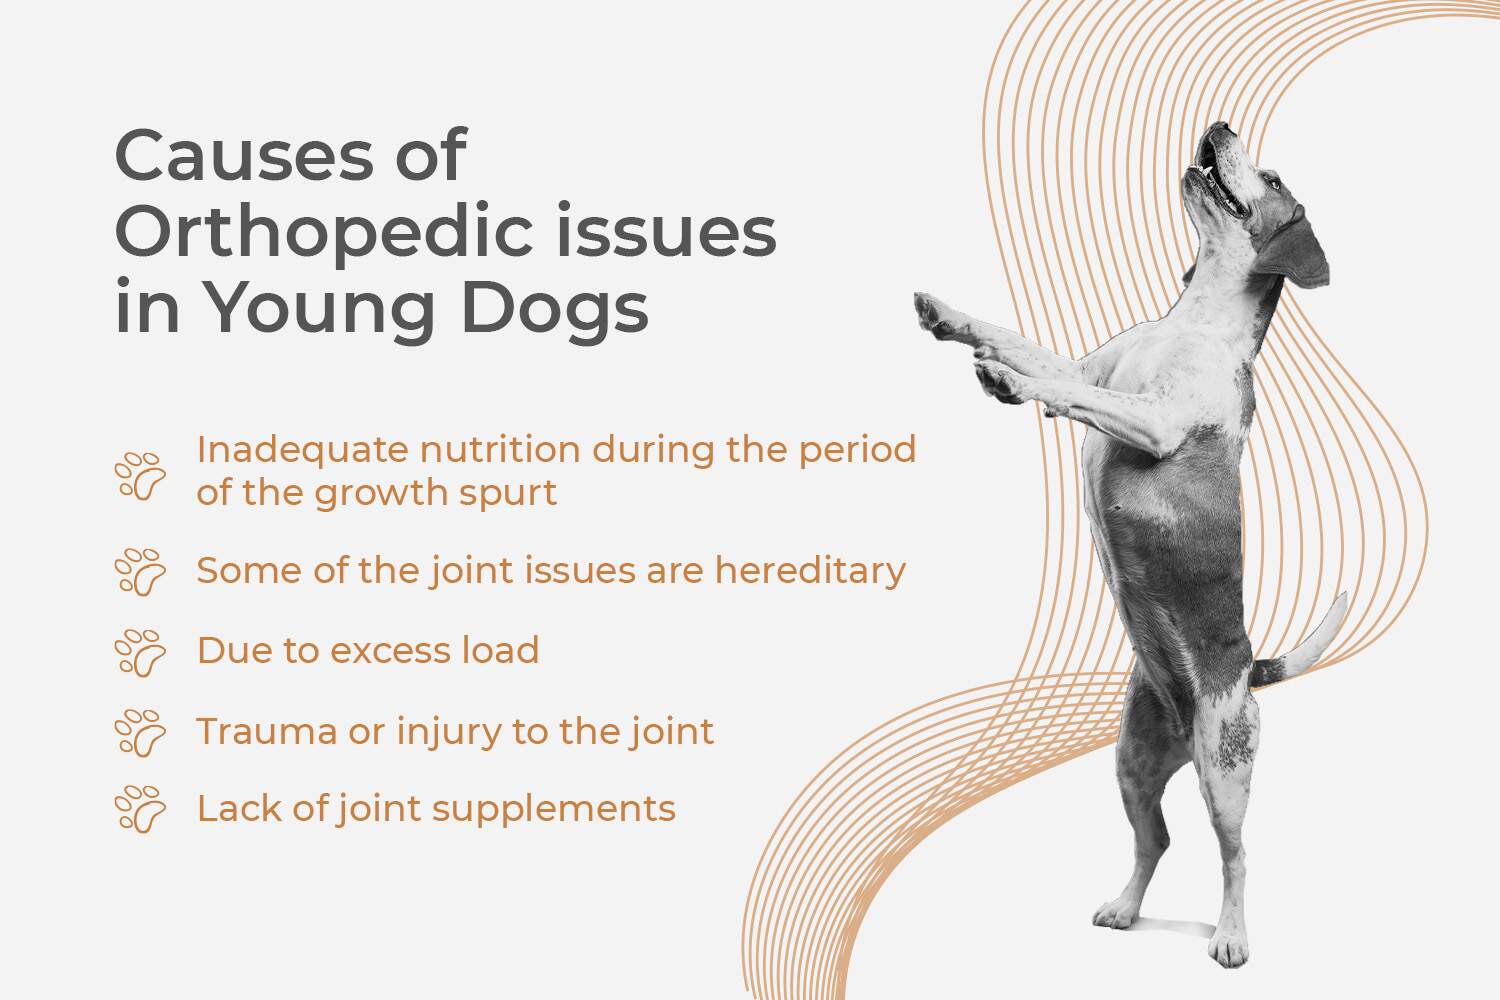 causes of Orthopedic issues in young dogs